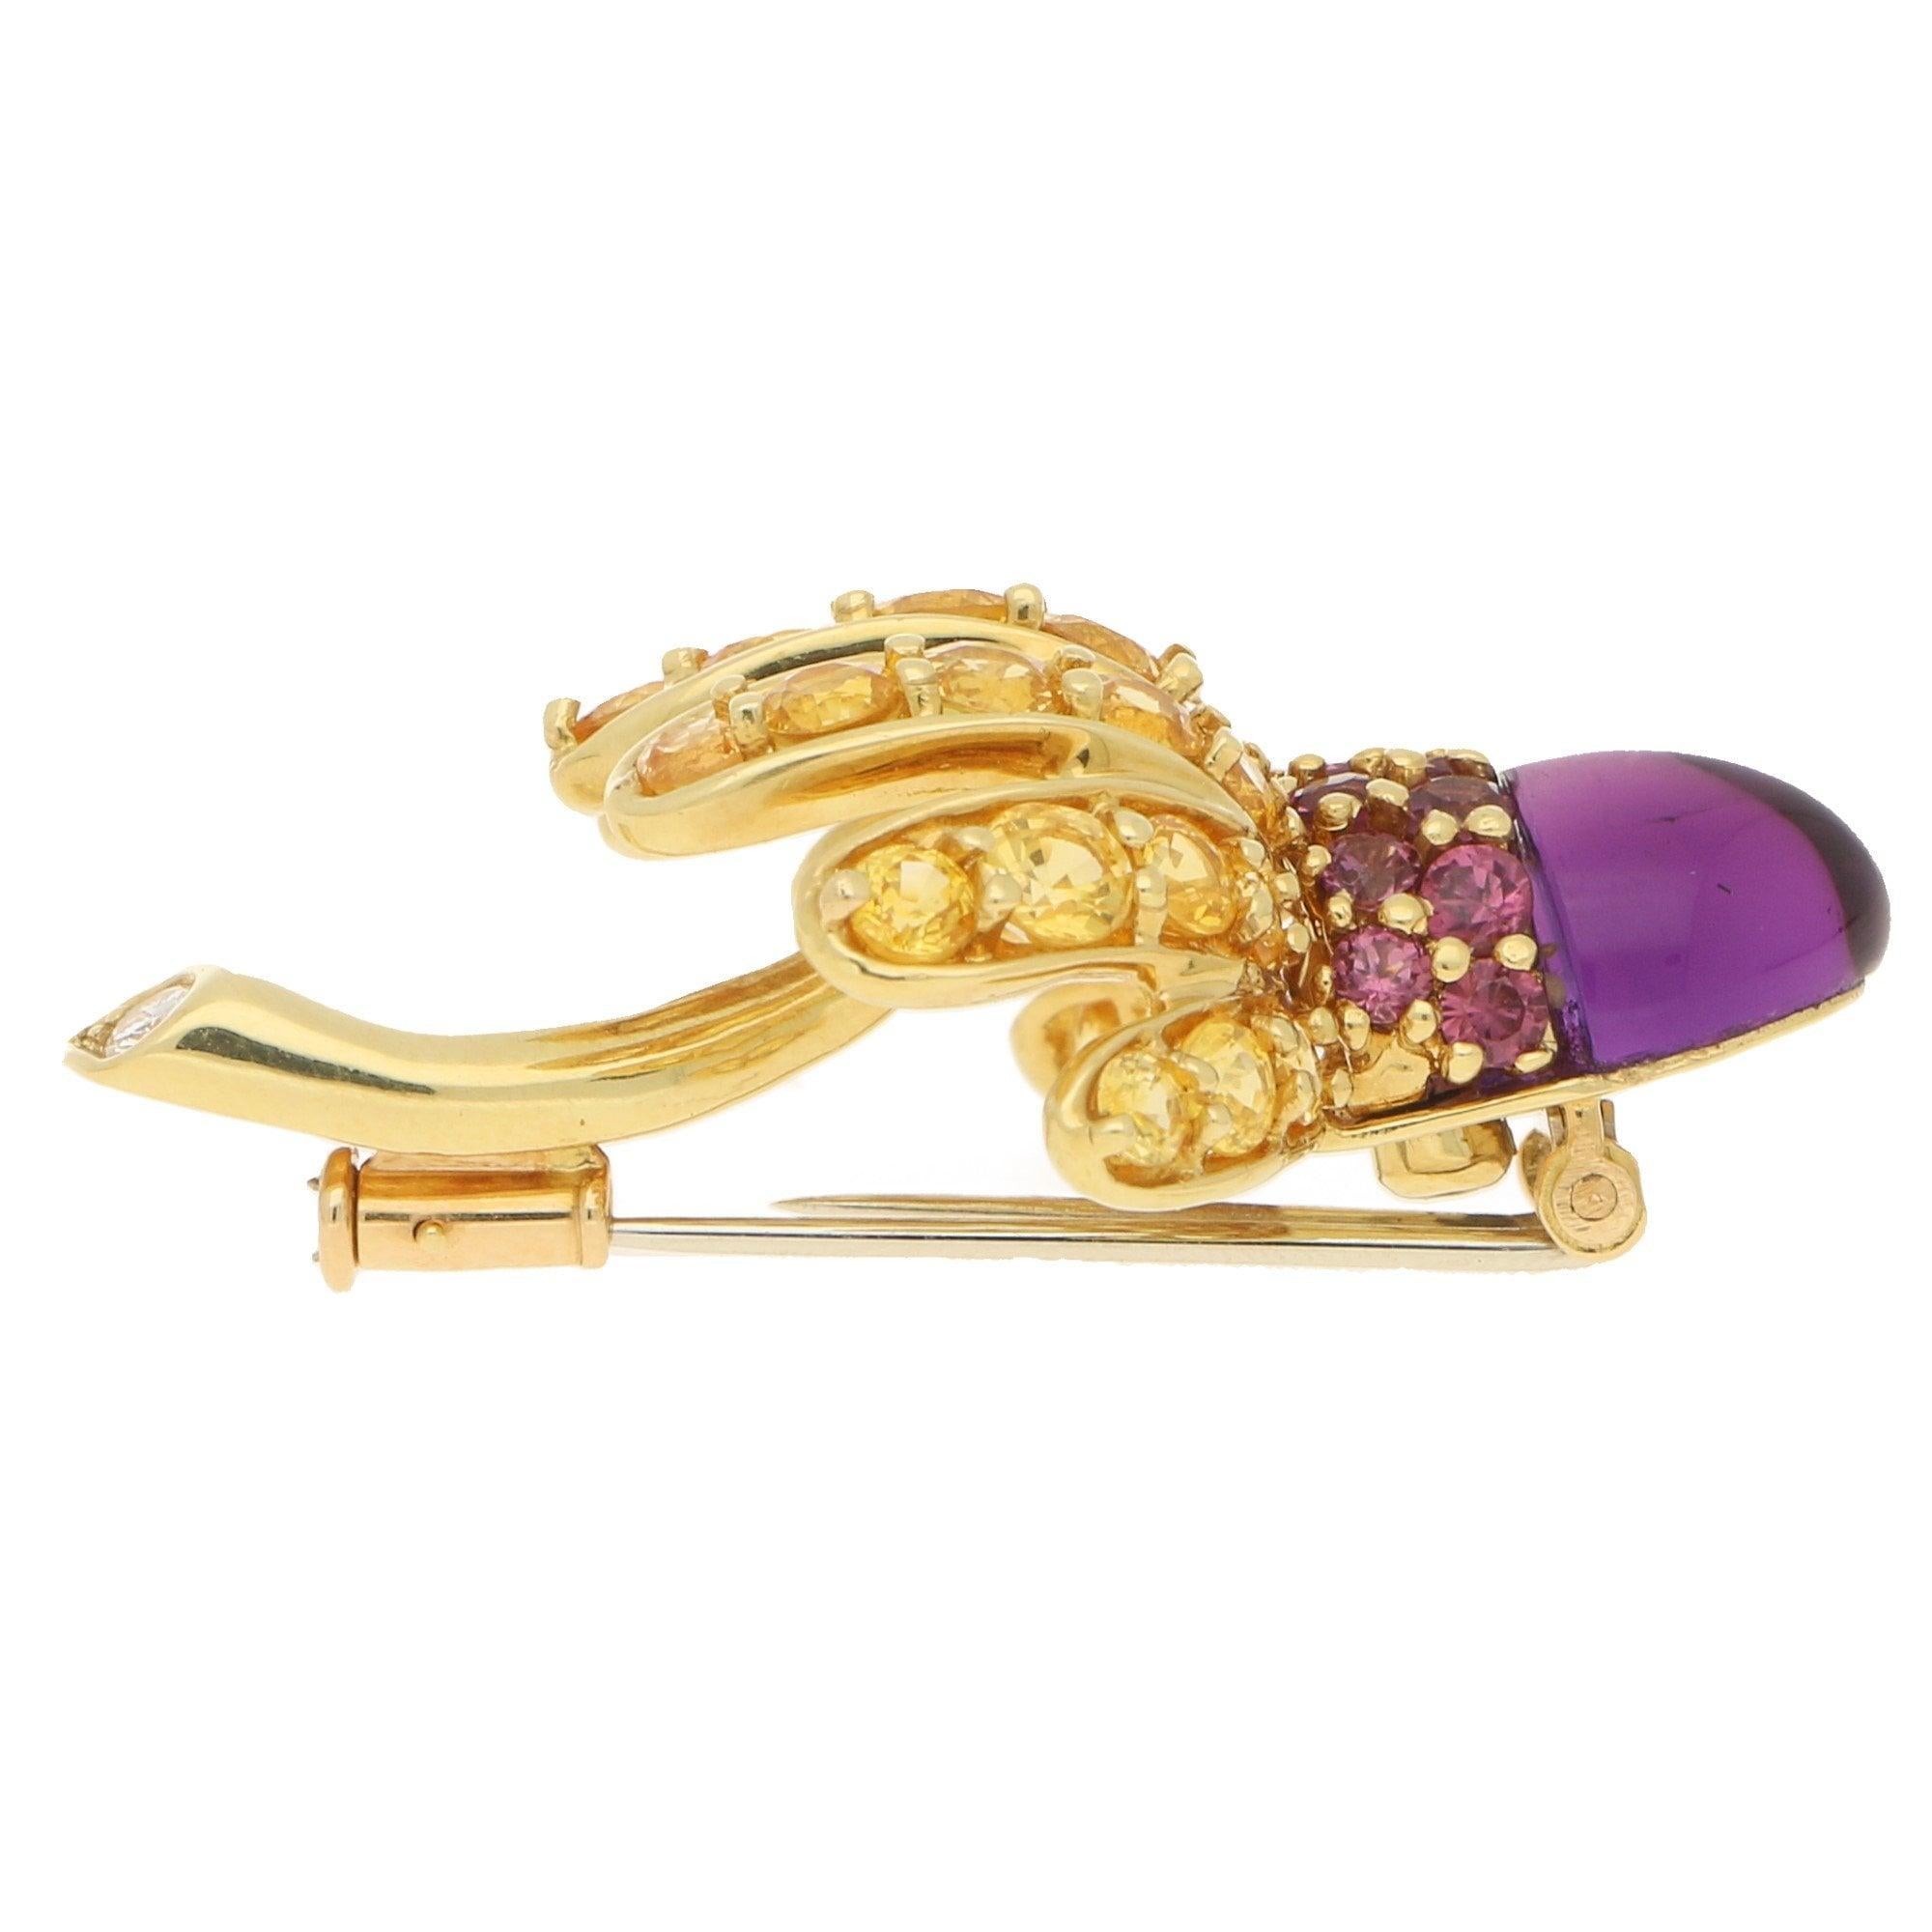 A stunning vintage Tiffany & Co. gem set thistle brooch set in 18k yellow gold. The brooch dates from 1993 and is designed as a stylised thistle. It is composed of an amethyst cabochon head surrounded by circular pink tourmaline to imitate the